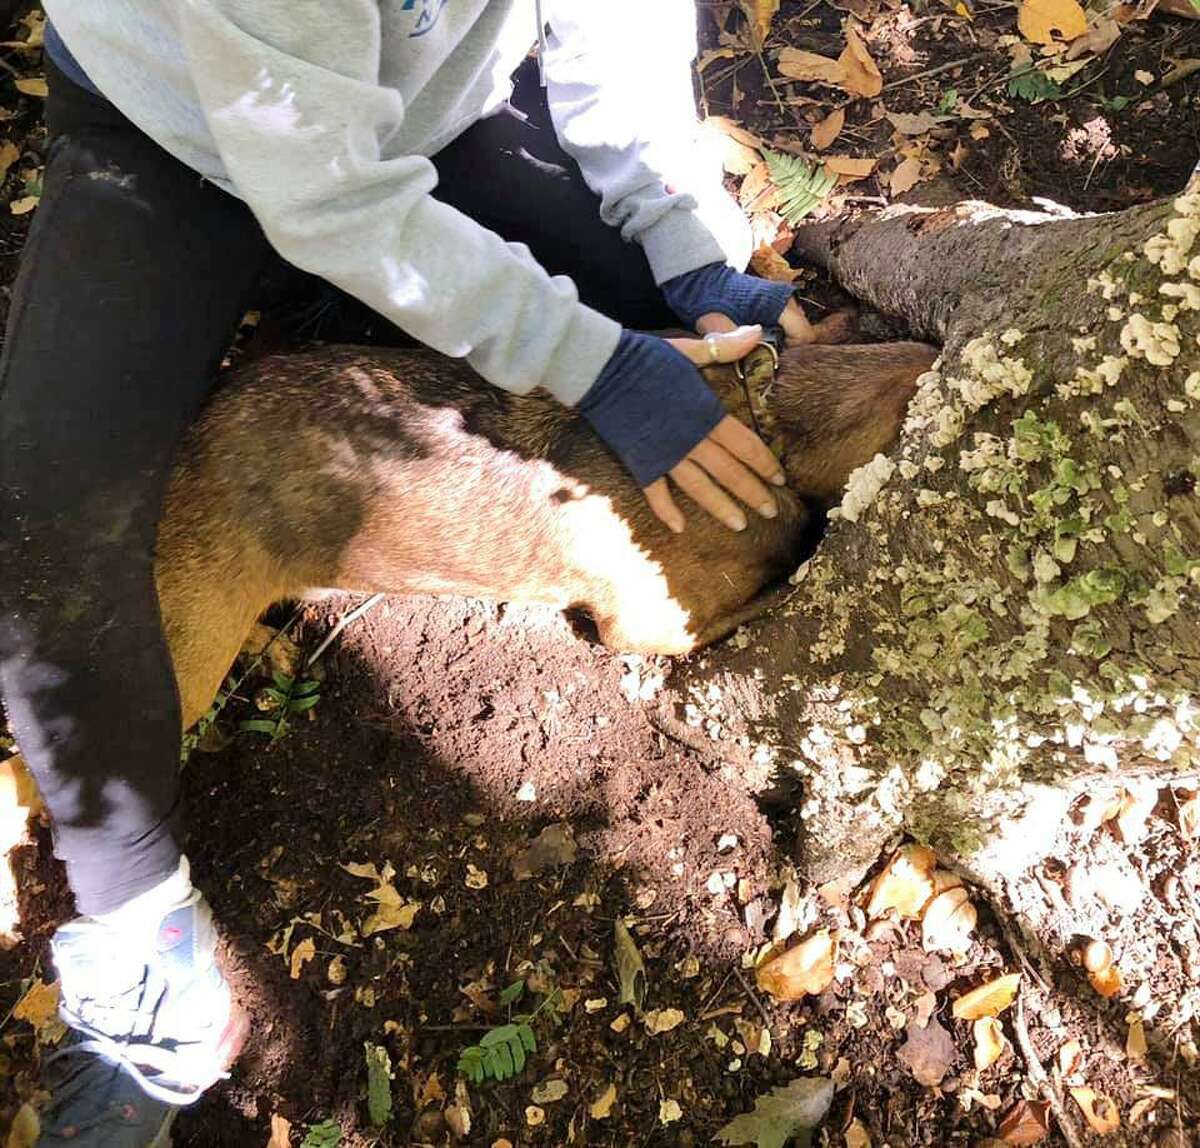 A dog got his head got stuck in the stump of a dead tree in Wilton.